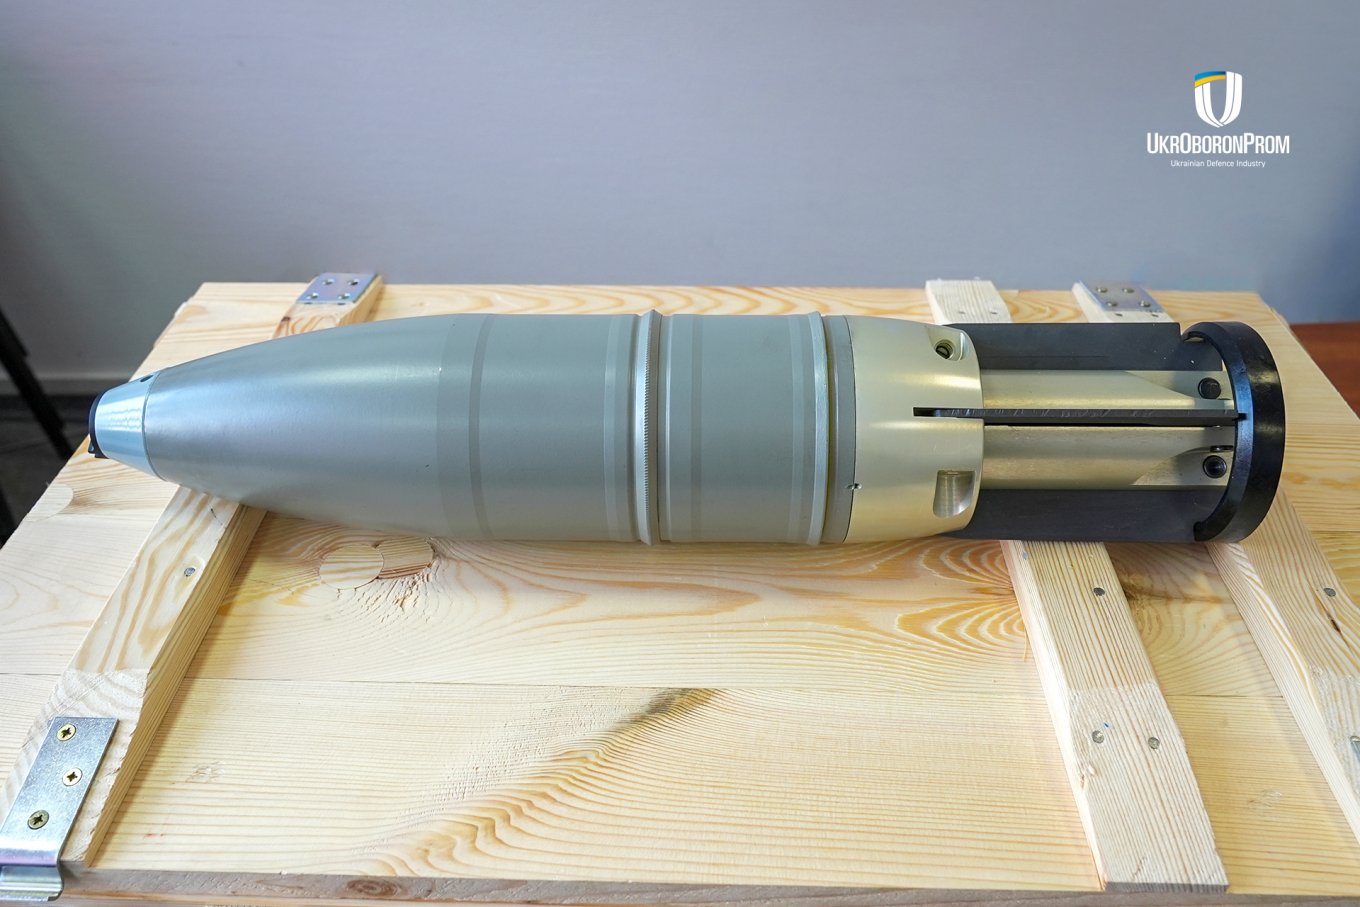 Ukraine and NATO Launched Joint 125mm Tank Shell Production, Defense Express